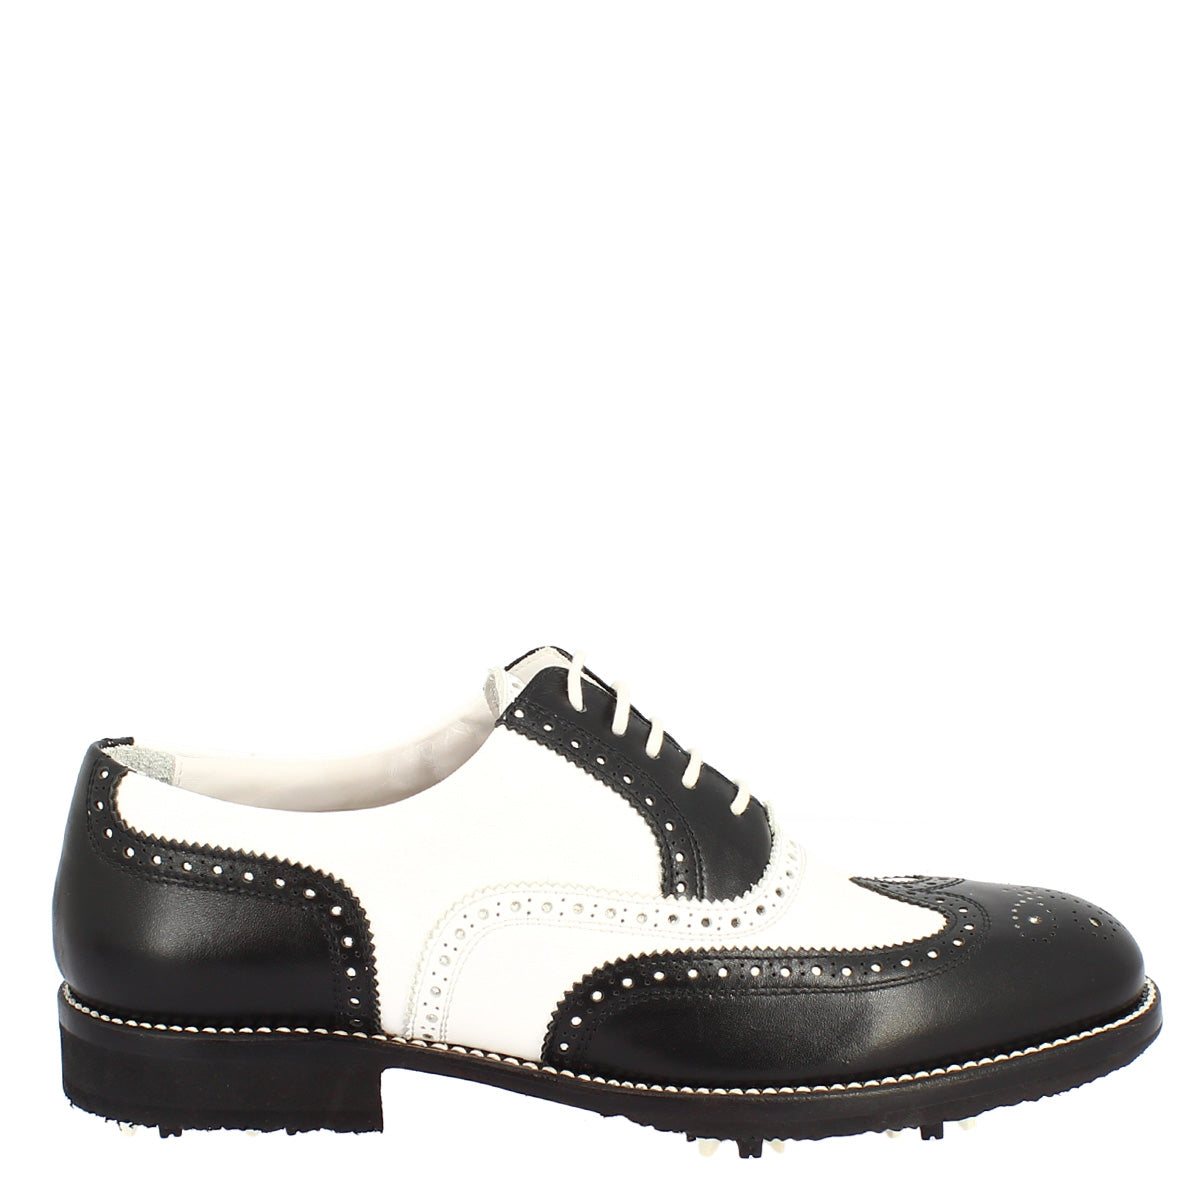 Two-tone black/white handcrafted leather golf shoes